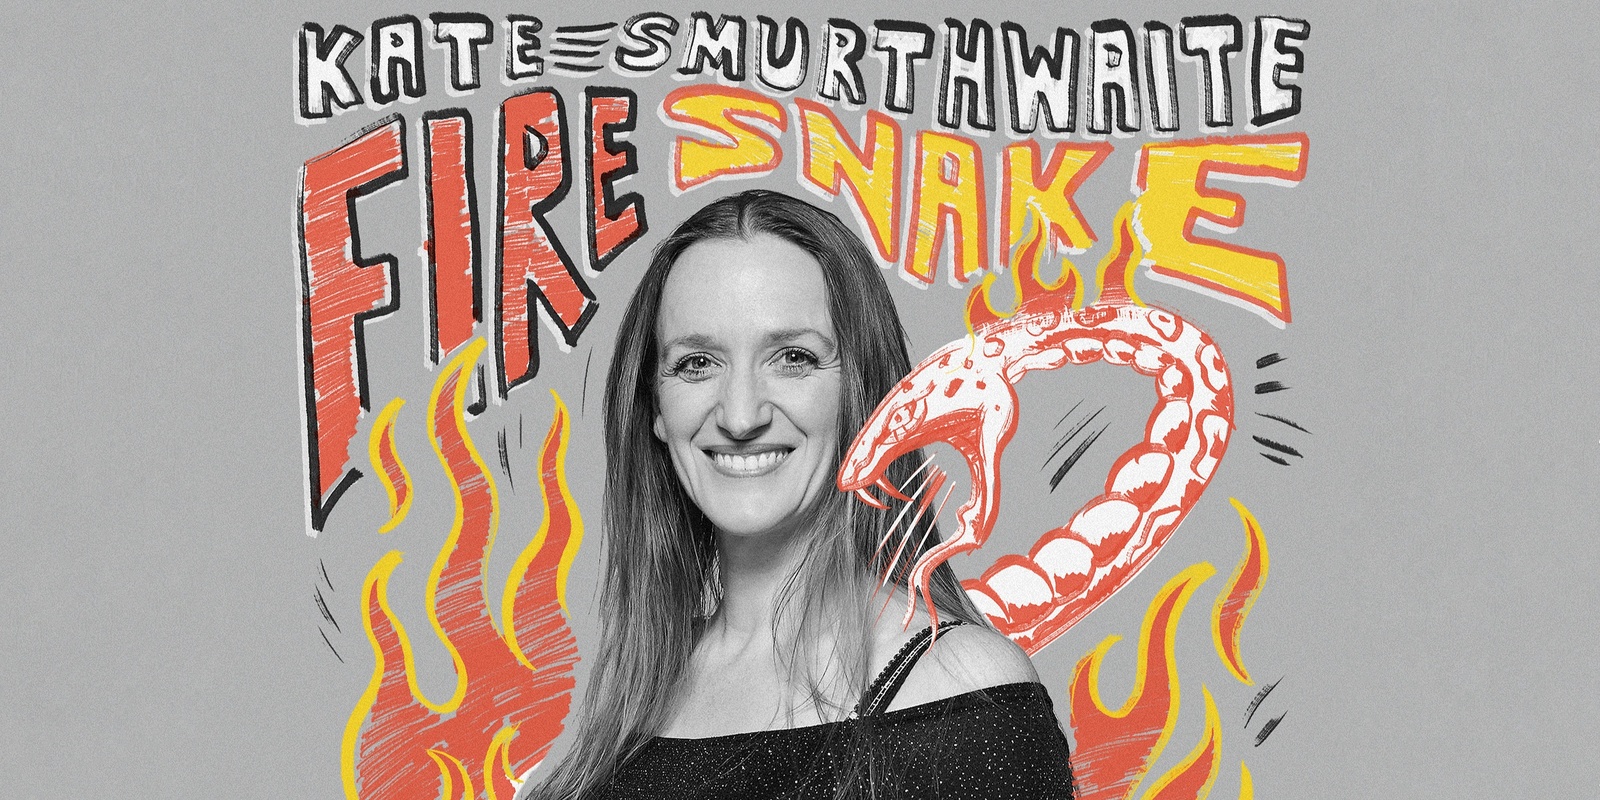 Banner image for The Clubhouse presents Kate Smurthwaite: Fire Snake